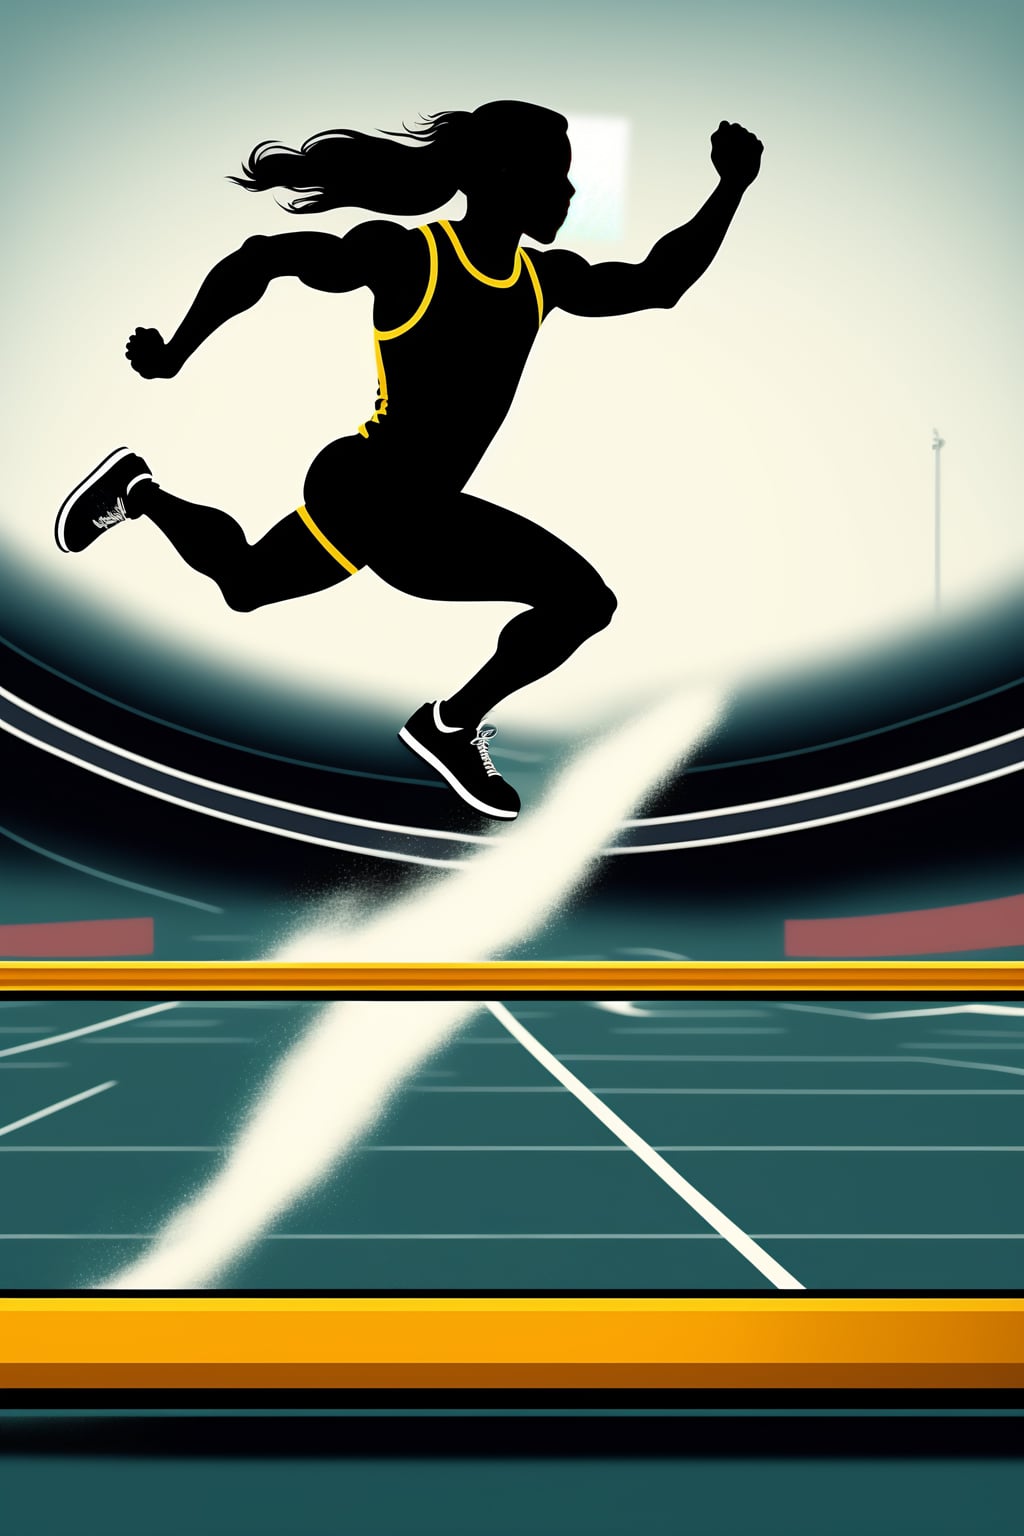 Lexica - cartoon of a person leaping over a hurdle in track and field